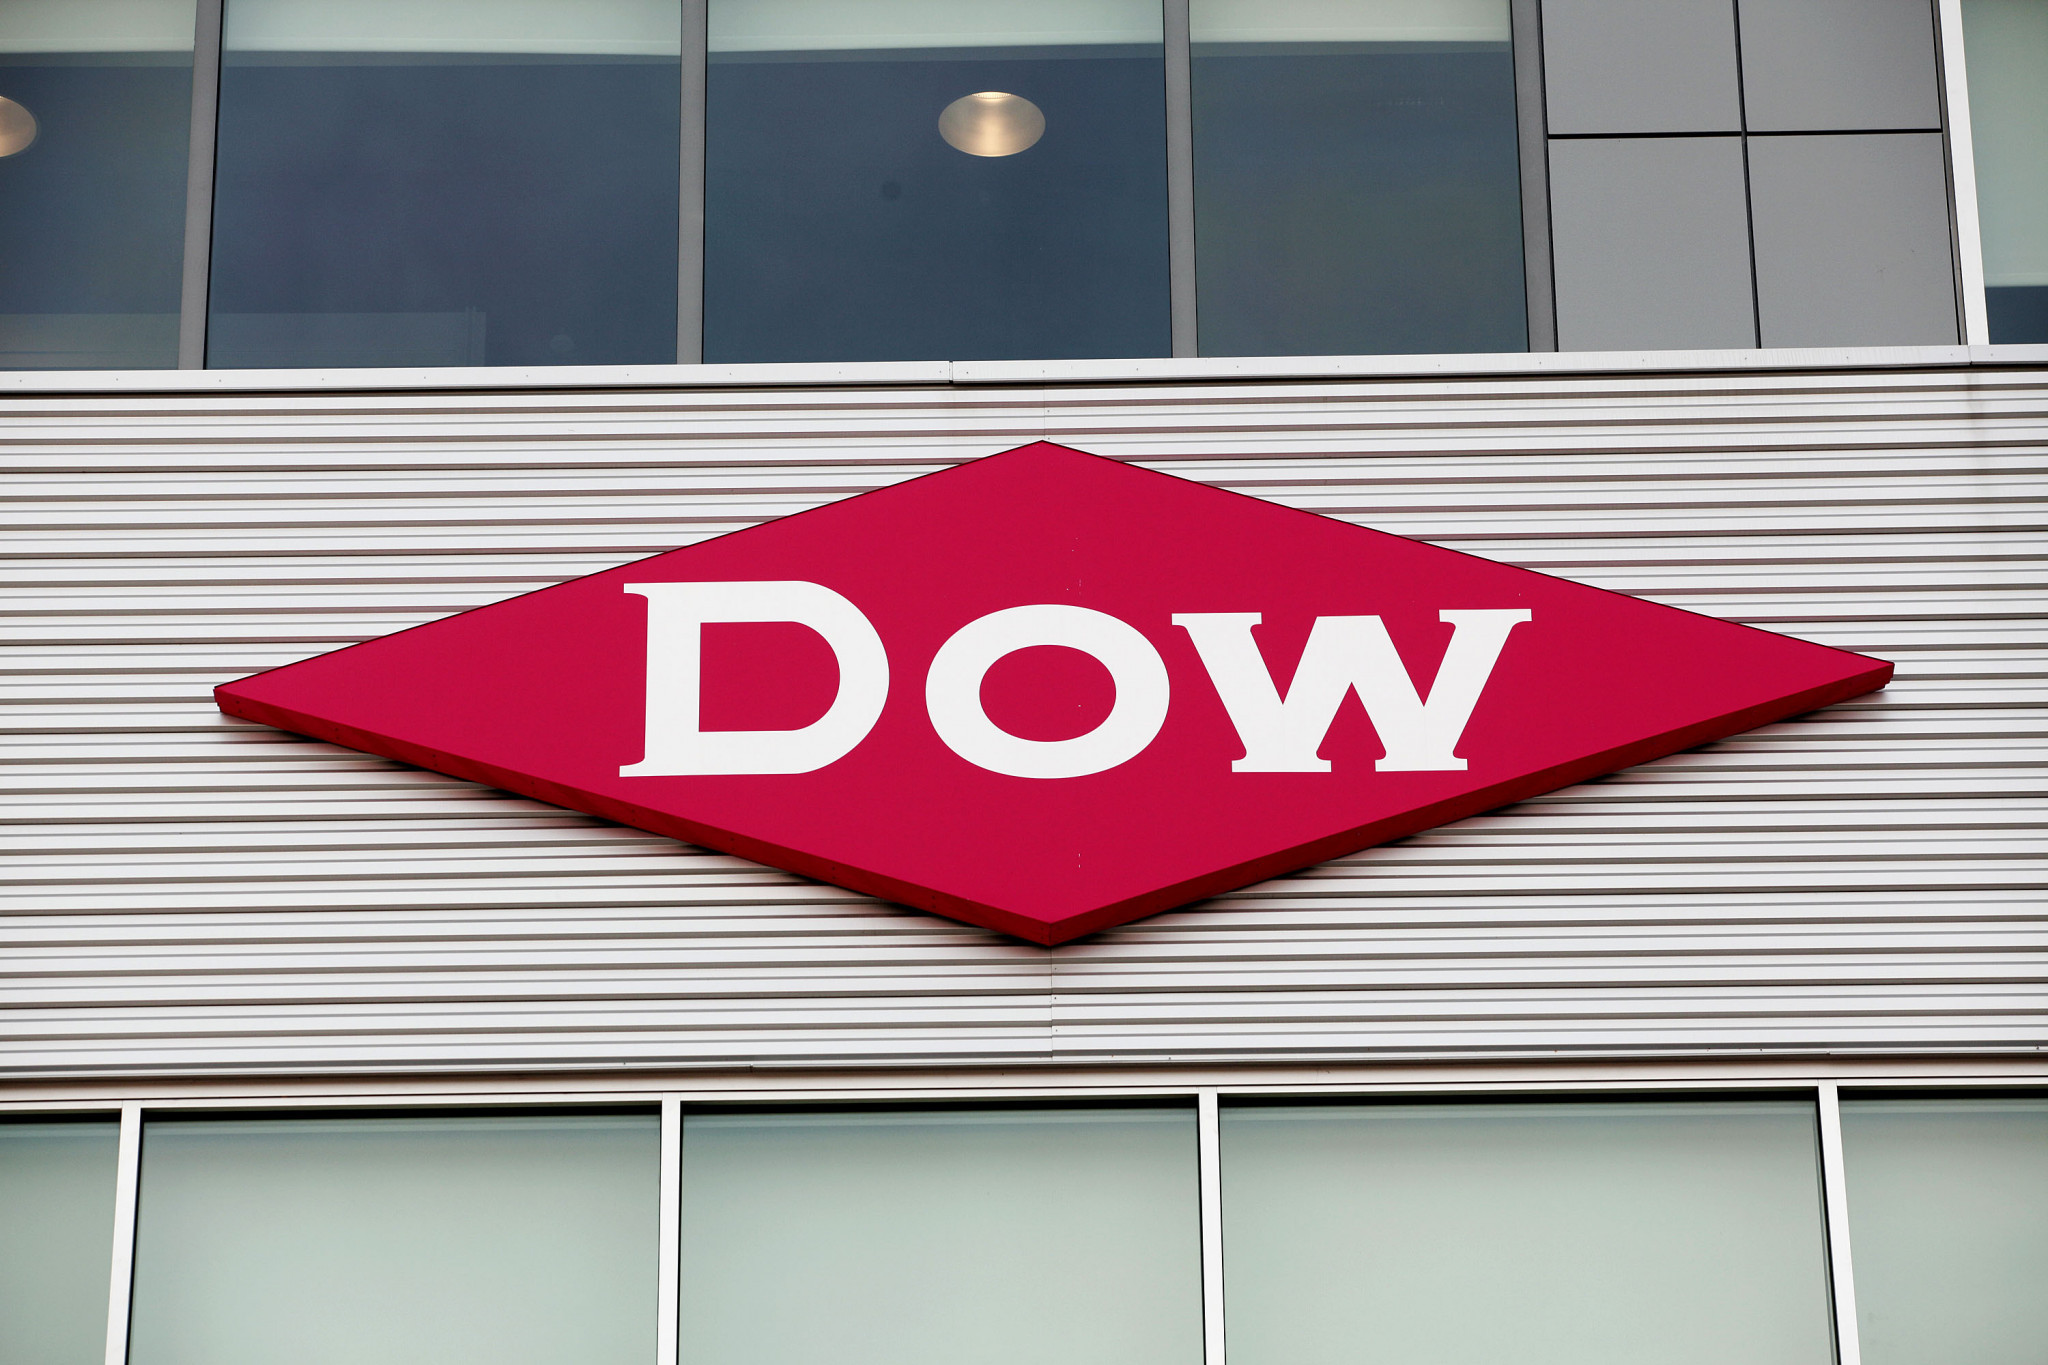 IOC sponsor Dow says COVID-19 "dramatically impacted" second-quarter results